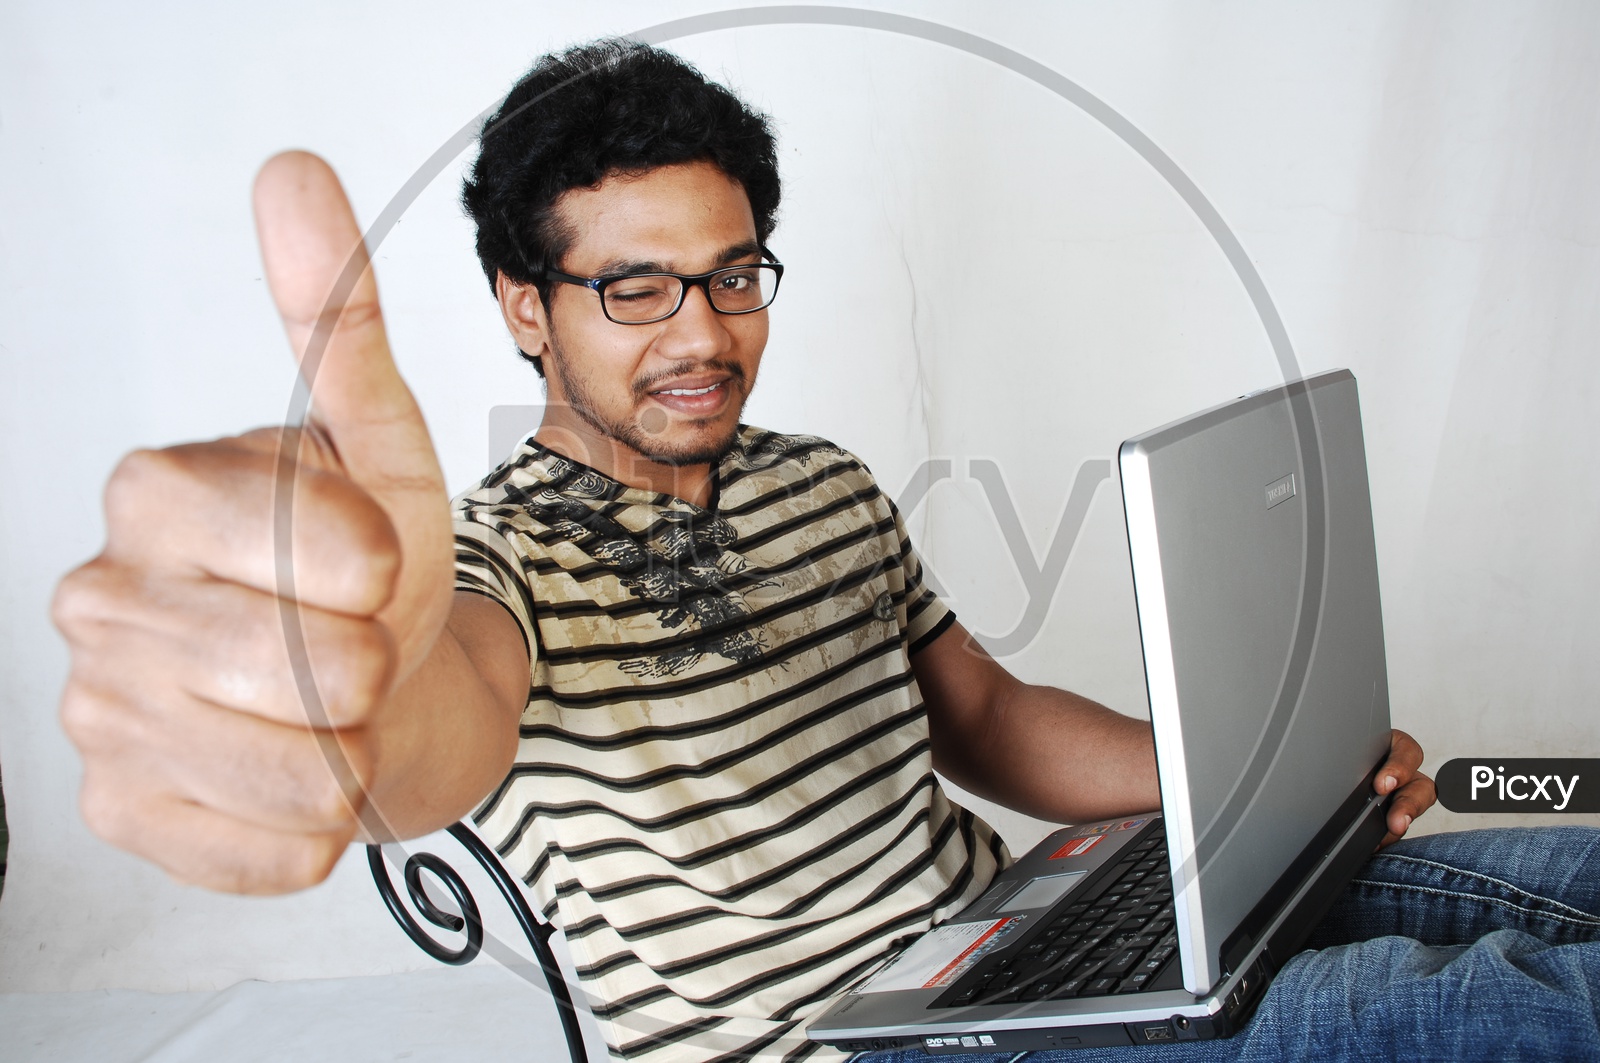 Young Indian Student With Laptop and Thumbsup Gesture